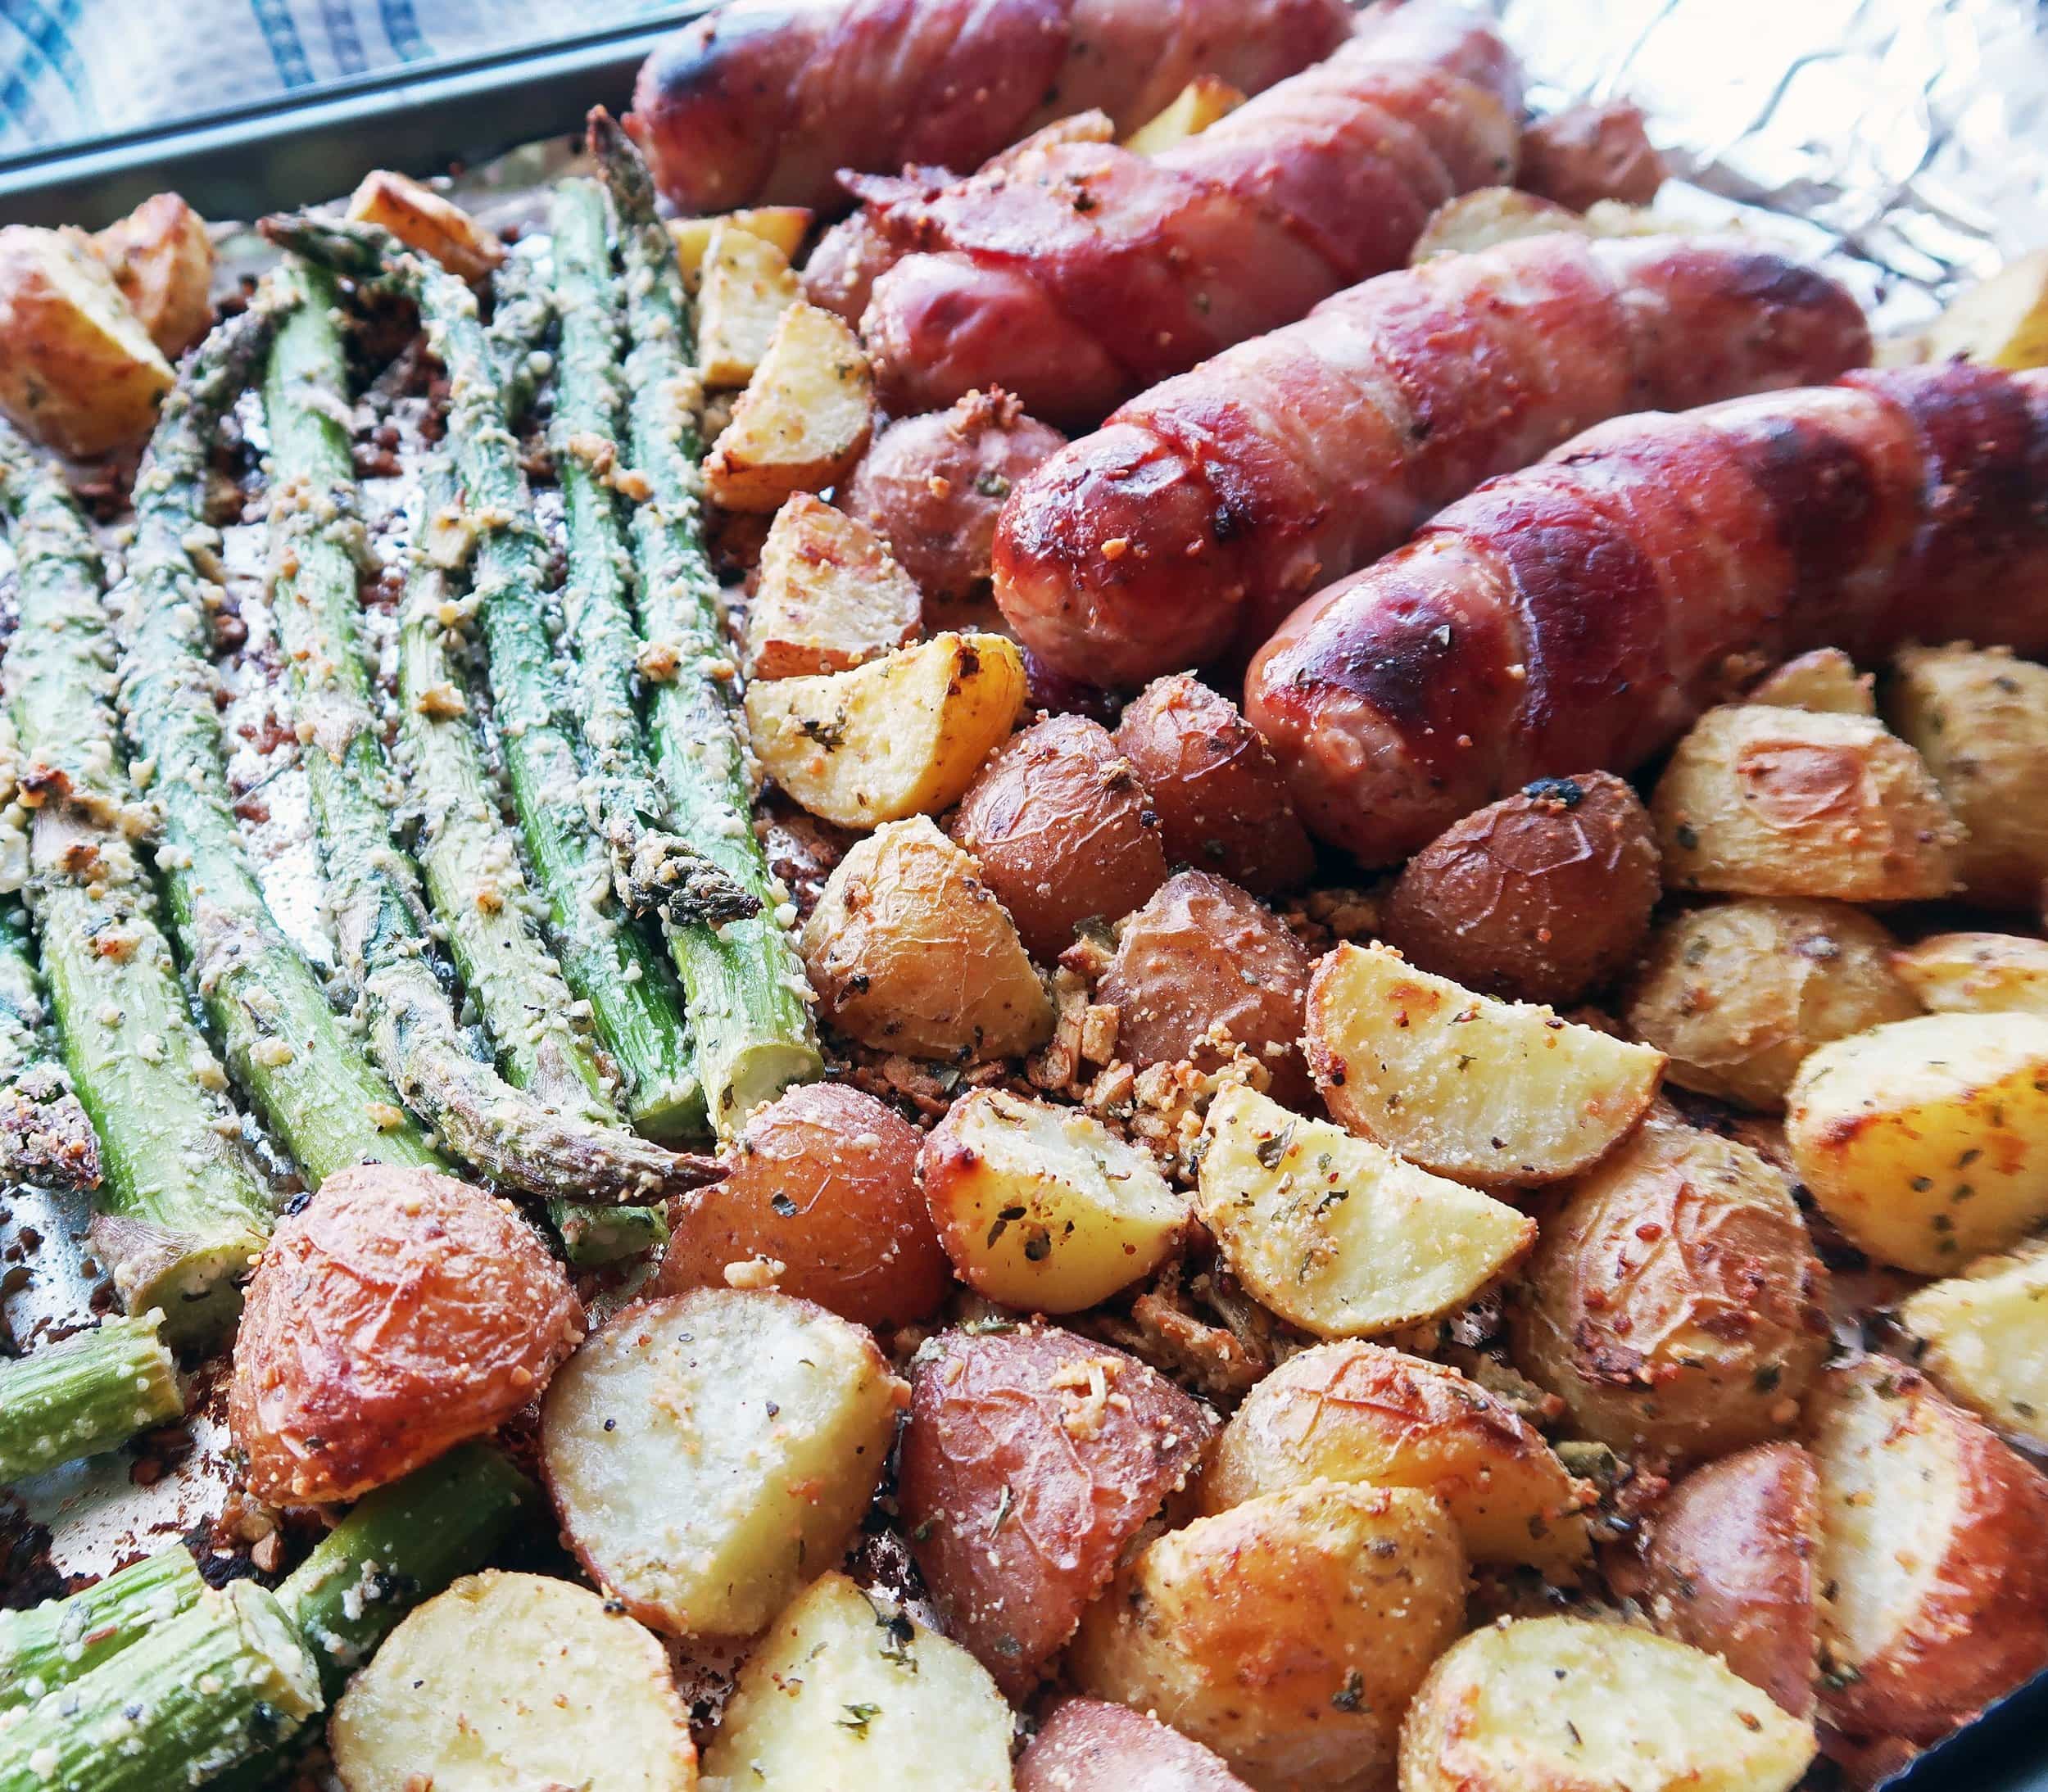 A close-up of parmesan covered potatoes and asparagus with bacon-wrapped sausages.